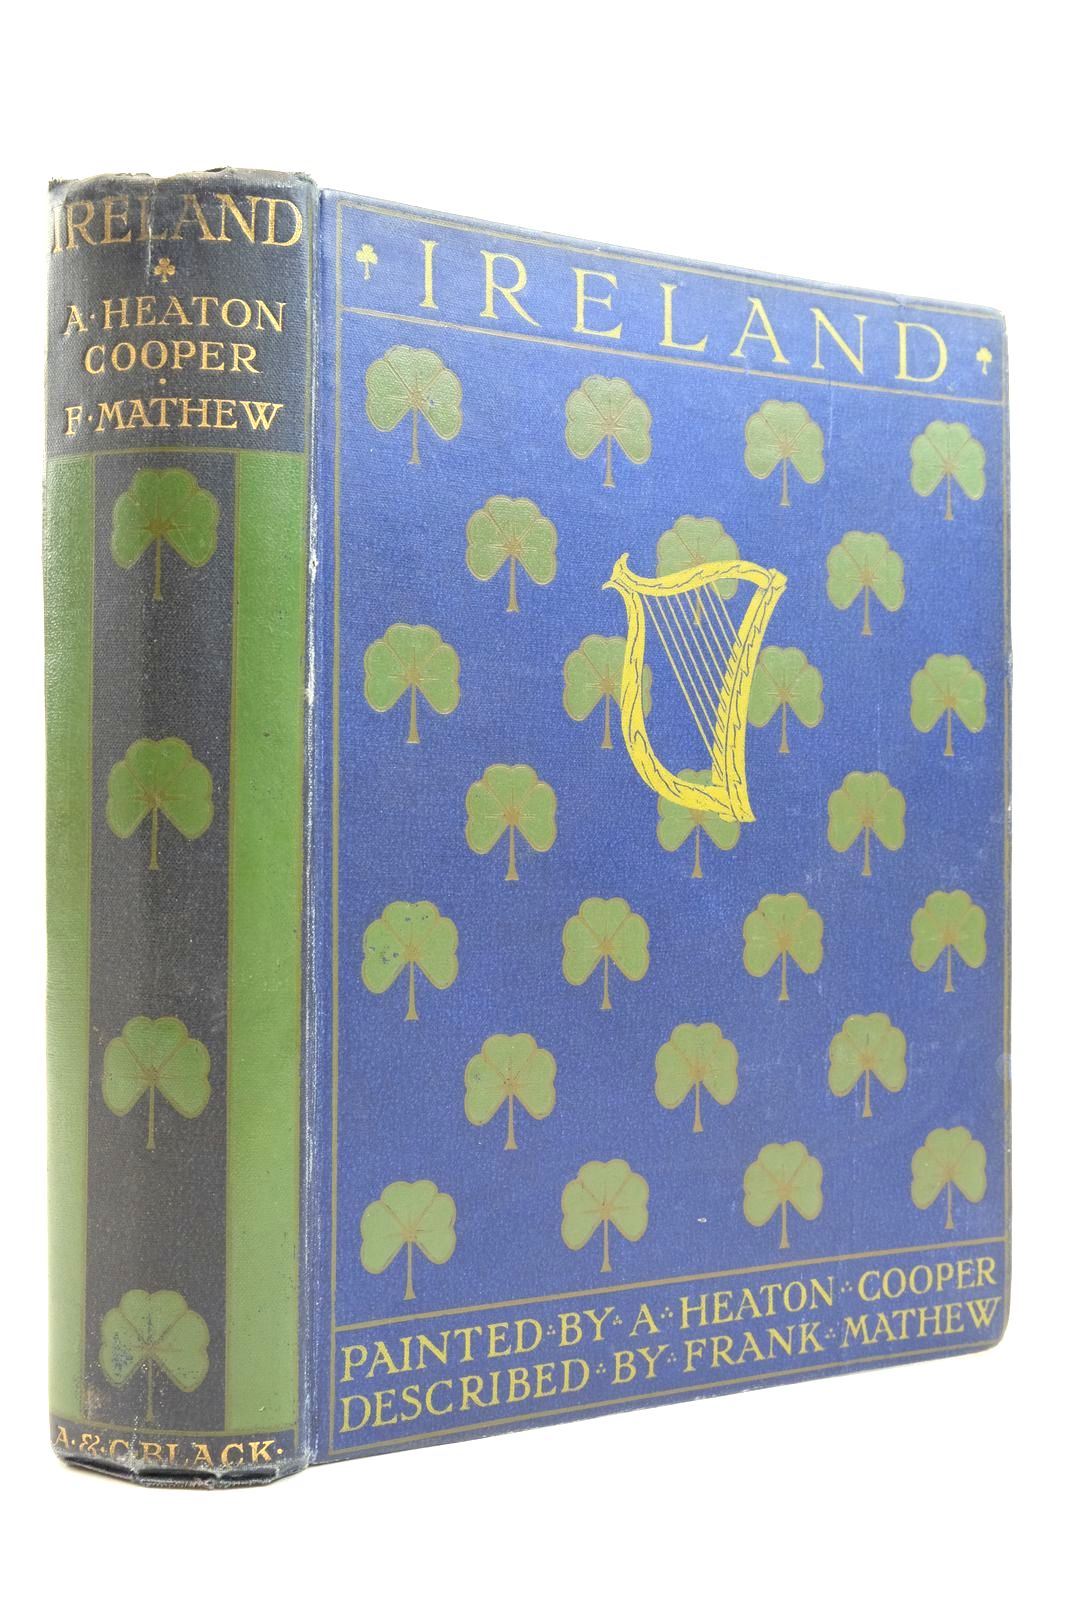 Photo of IRELAND written by Mathew, Frank illustrated by Cooper, A. Heaton published by A. &amp; C. Black Ltd. (STOCK CODE: 2137240)  for sale by Stella & Rose's Books